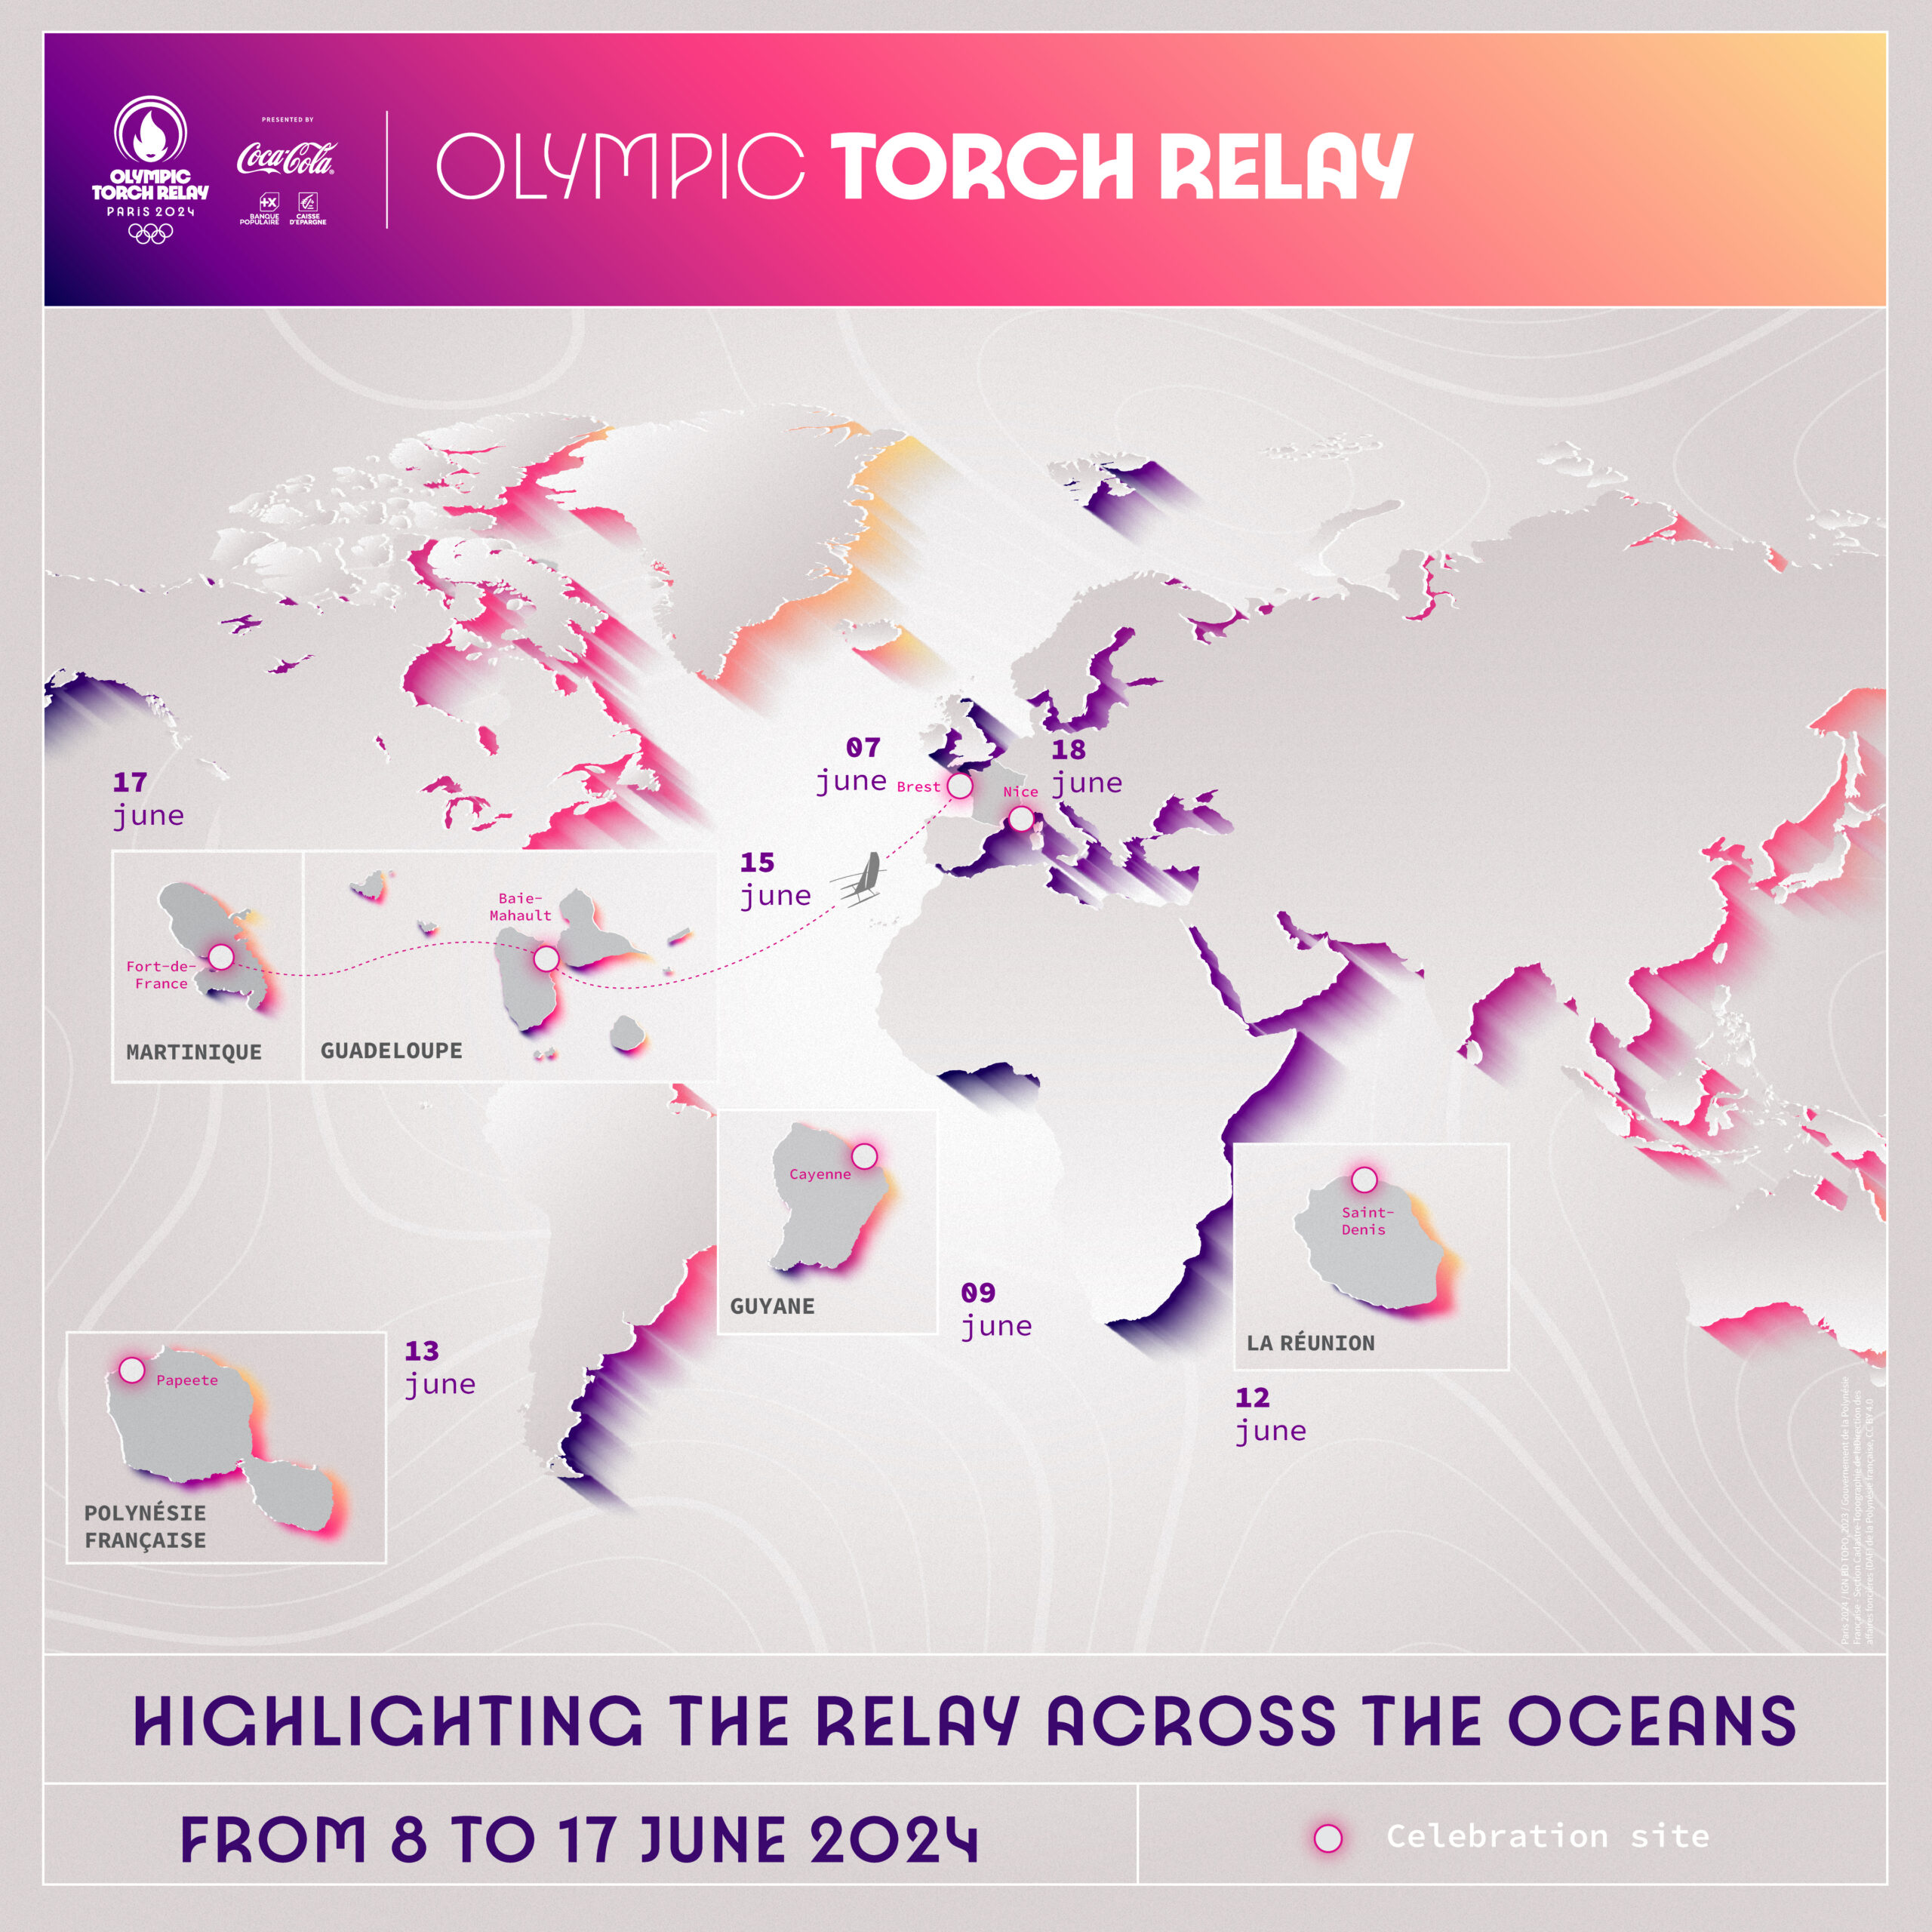 Paris 2024 - Olympic Torch Relay route